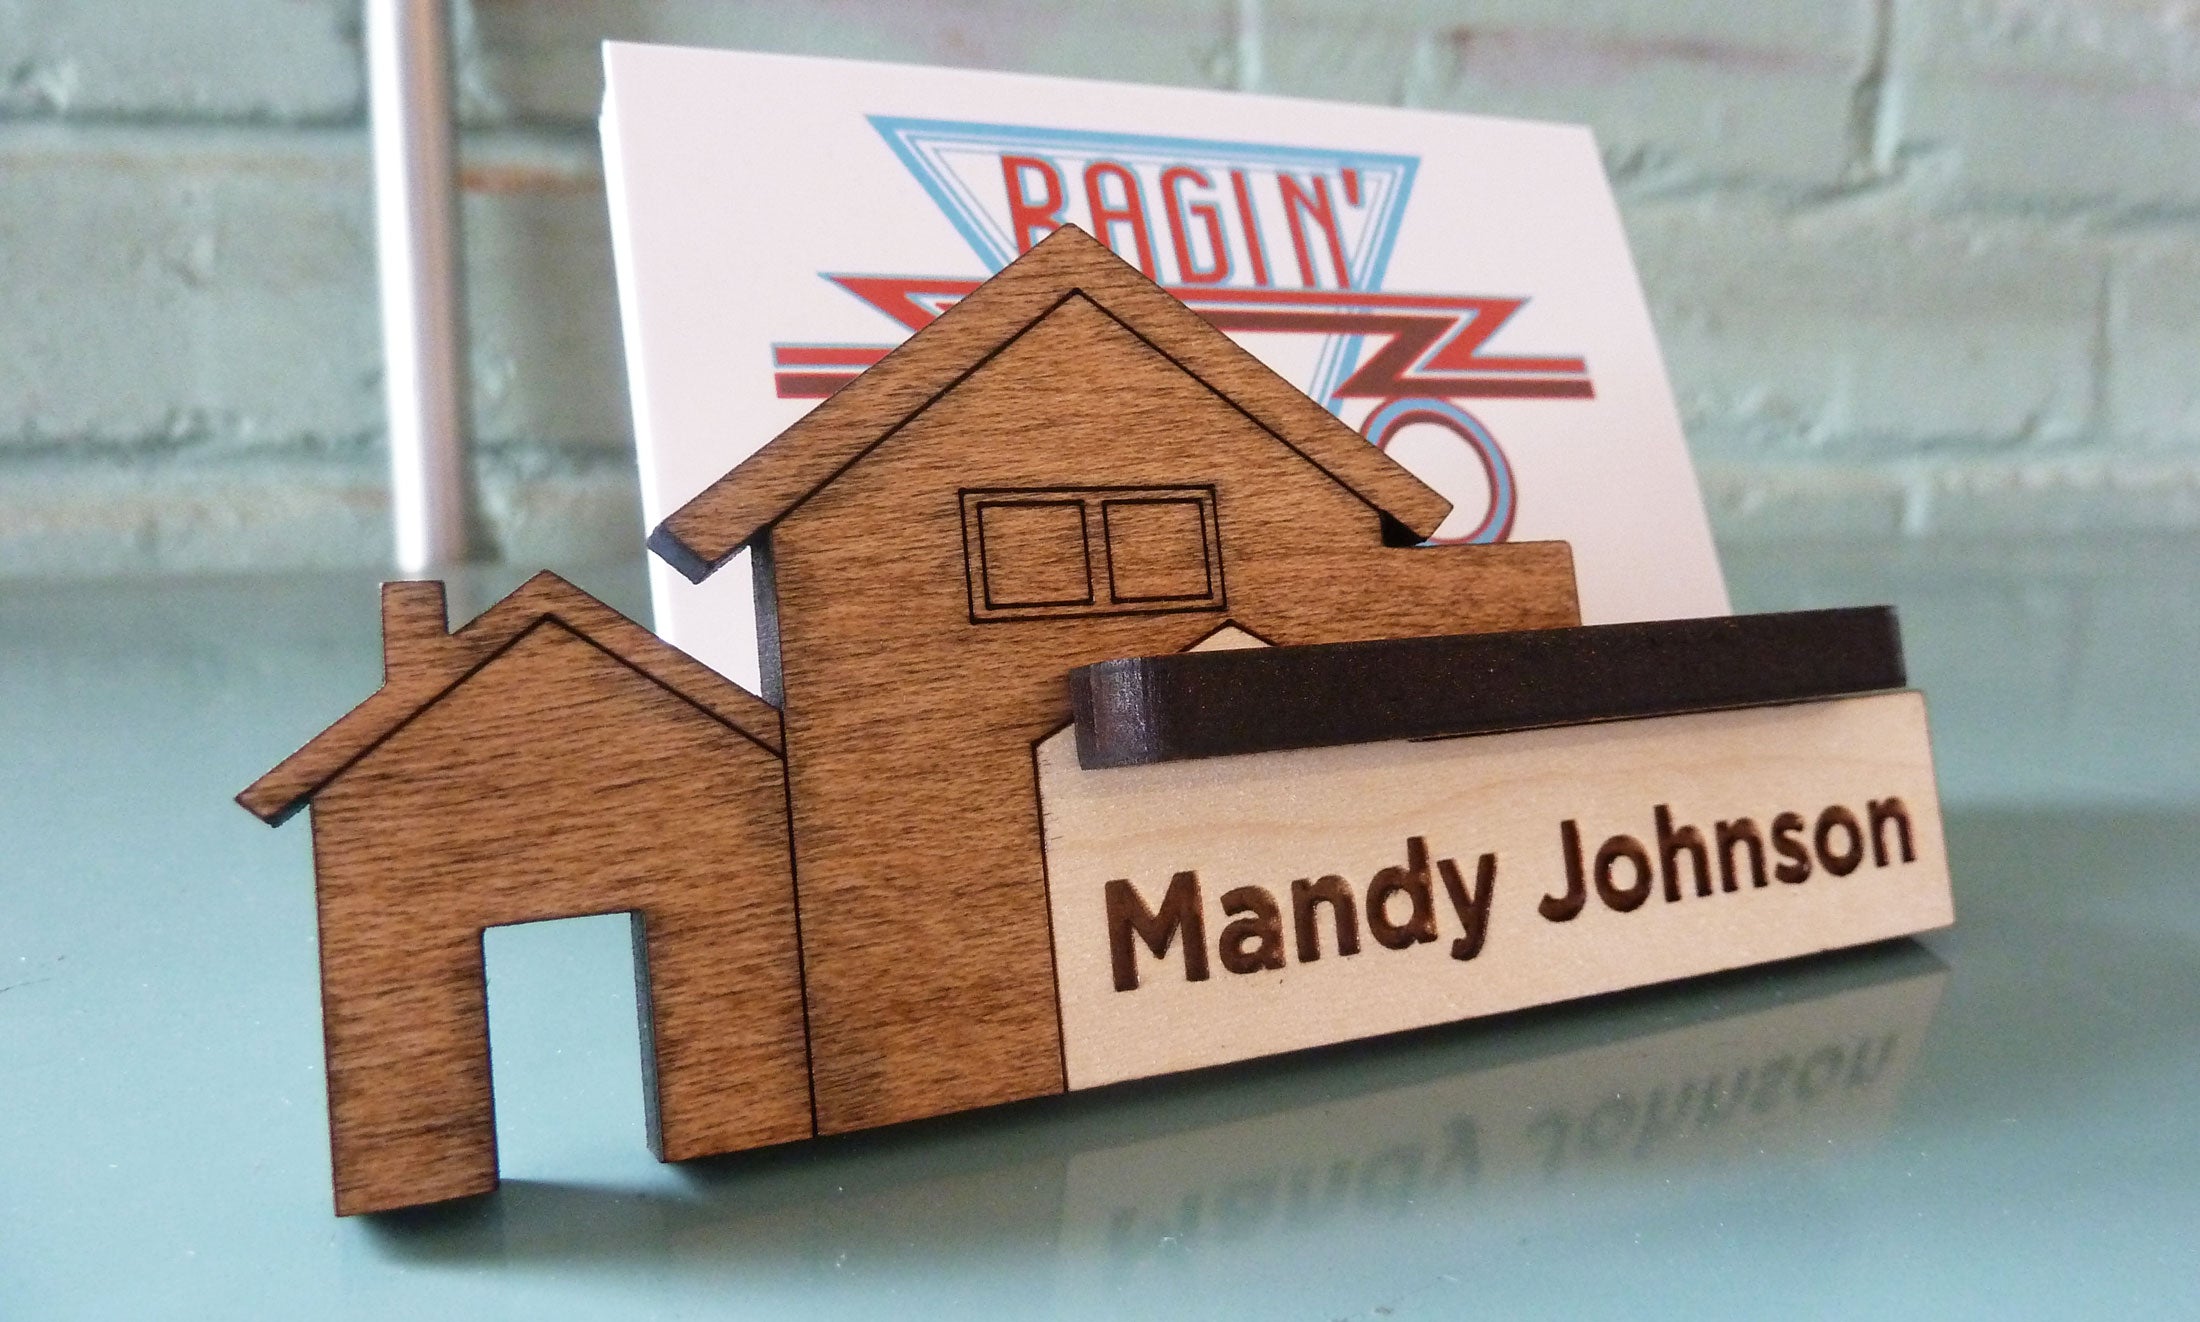 Real Estate Business Card Holder - Personalized and Adjustable